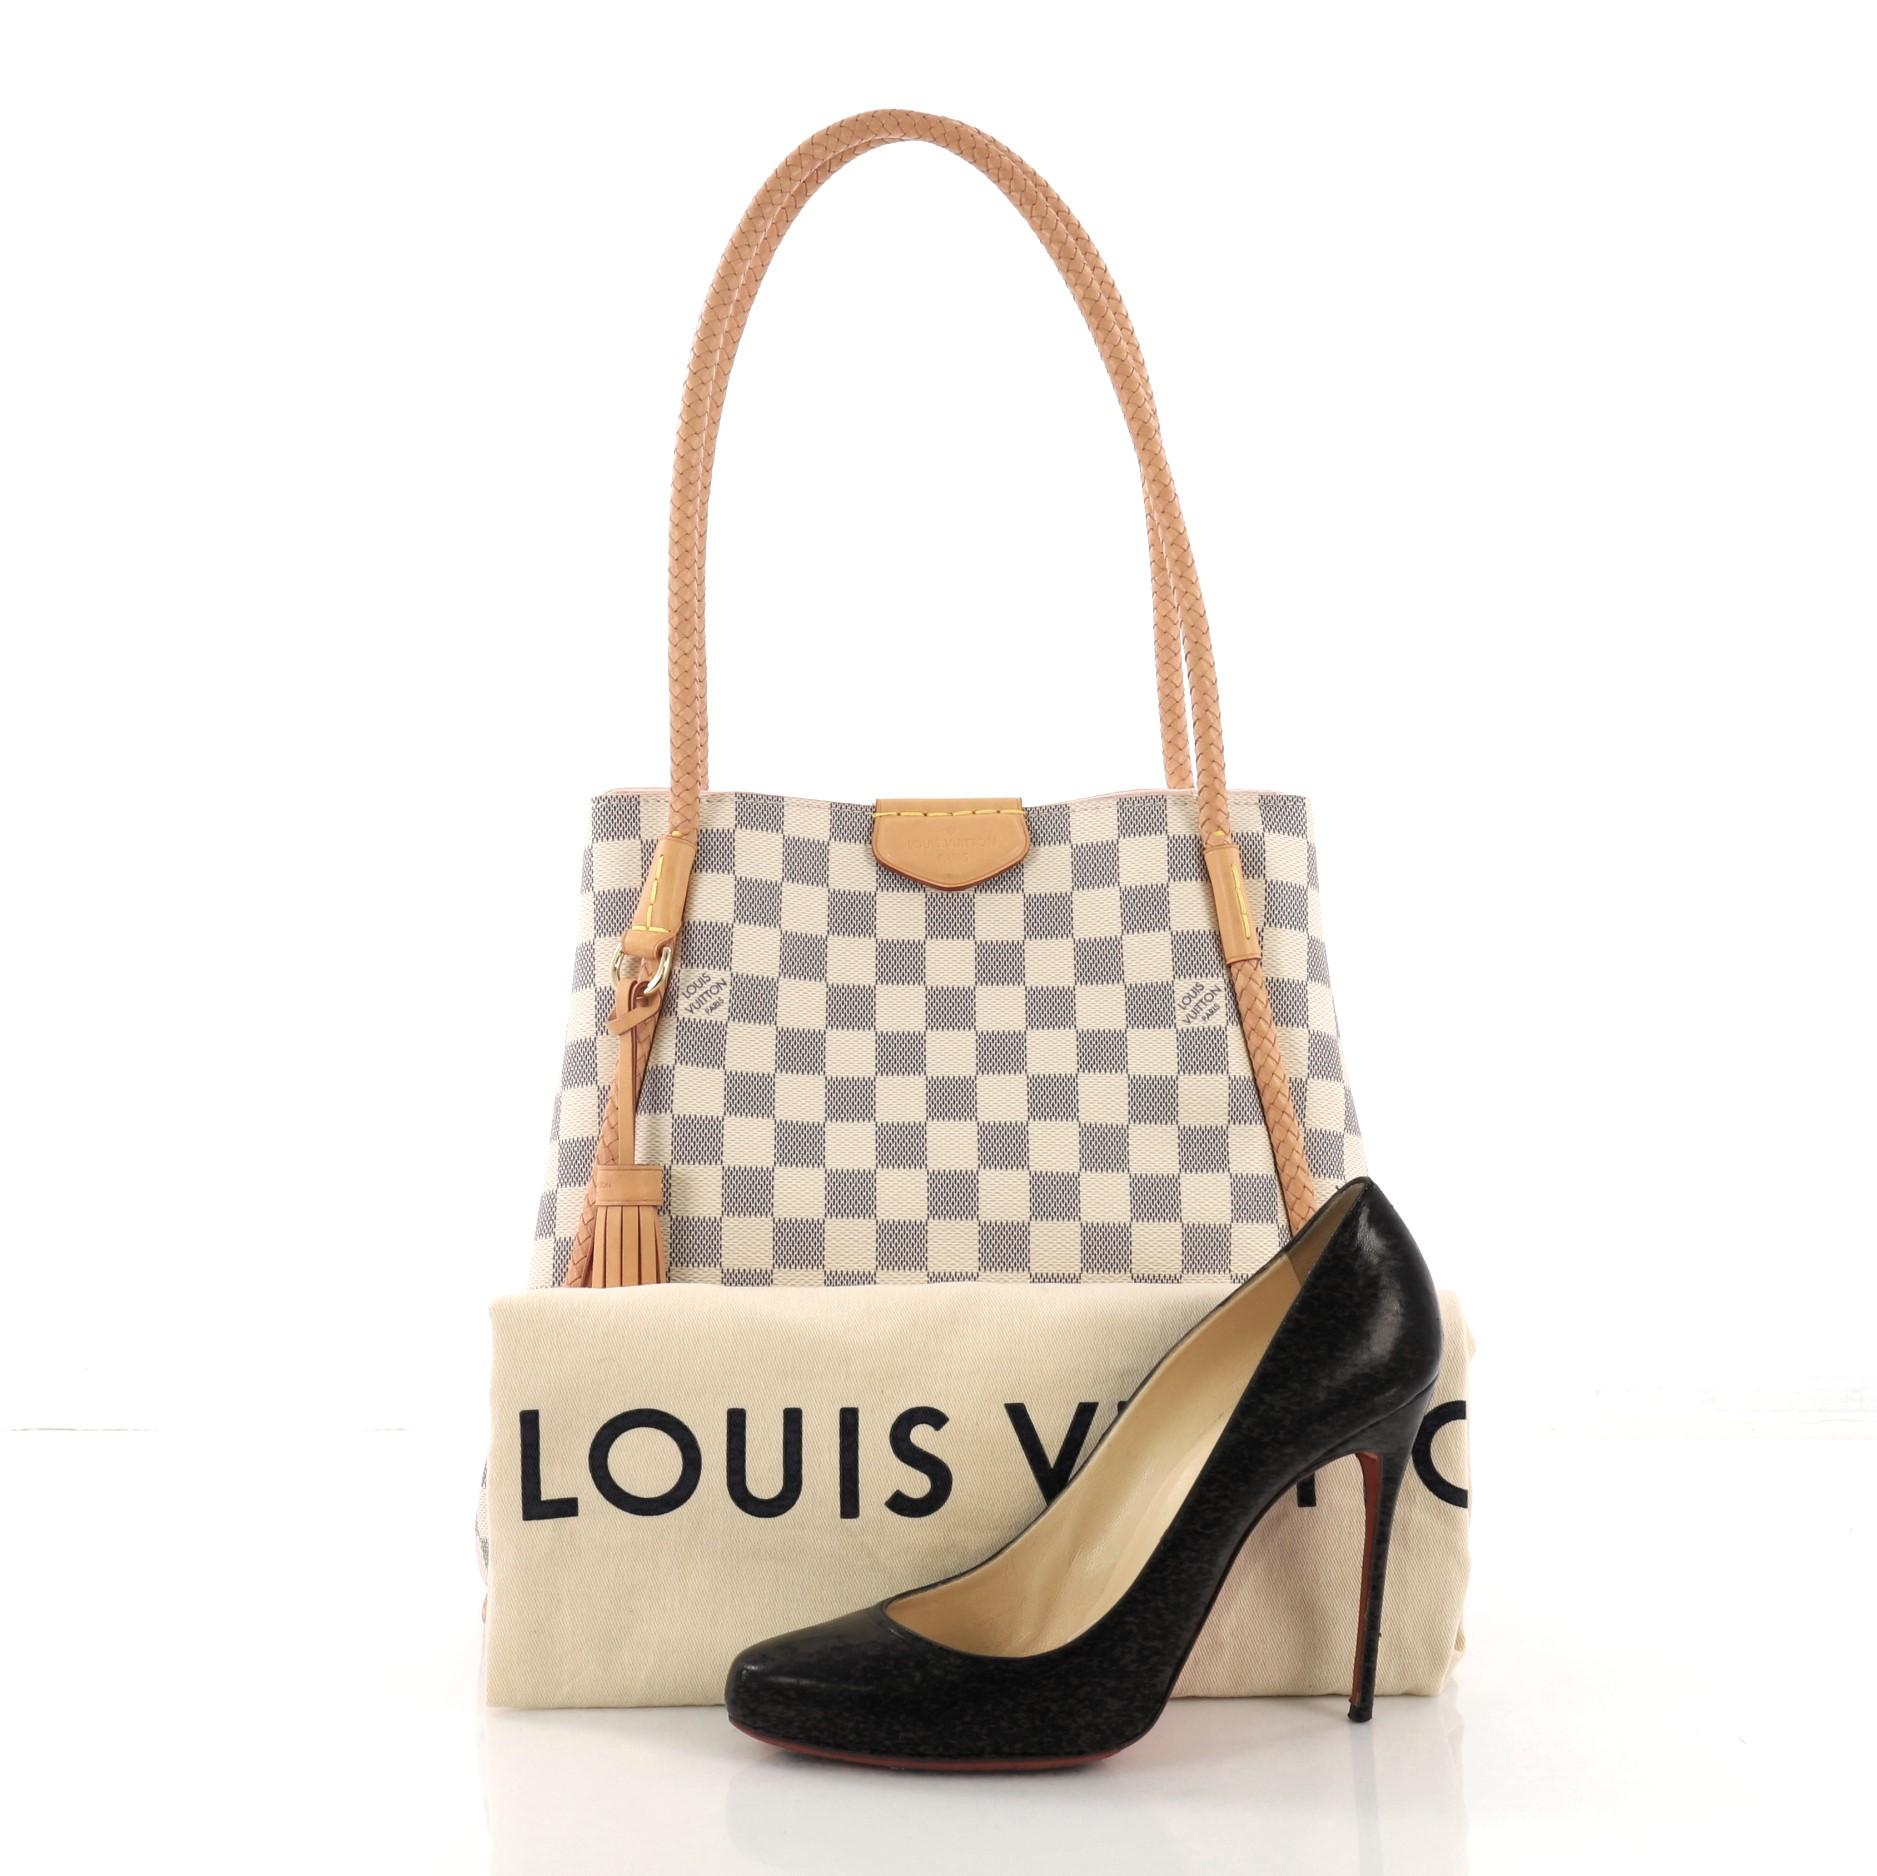 This Louis Vuitton Propriano Handbag Damier, crafted in damier azur coated canvas, features braided leather piping and handles, and gold-tone hardware. Its magnetic closure opens to a pink microfiber interior with zip pocket. Authenticity code